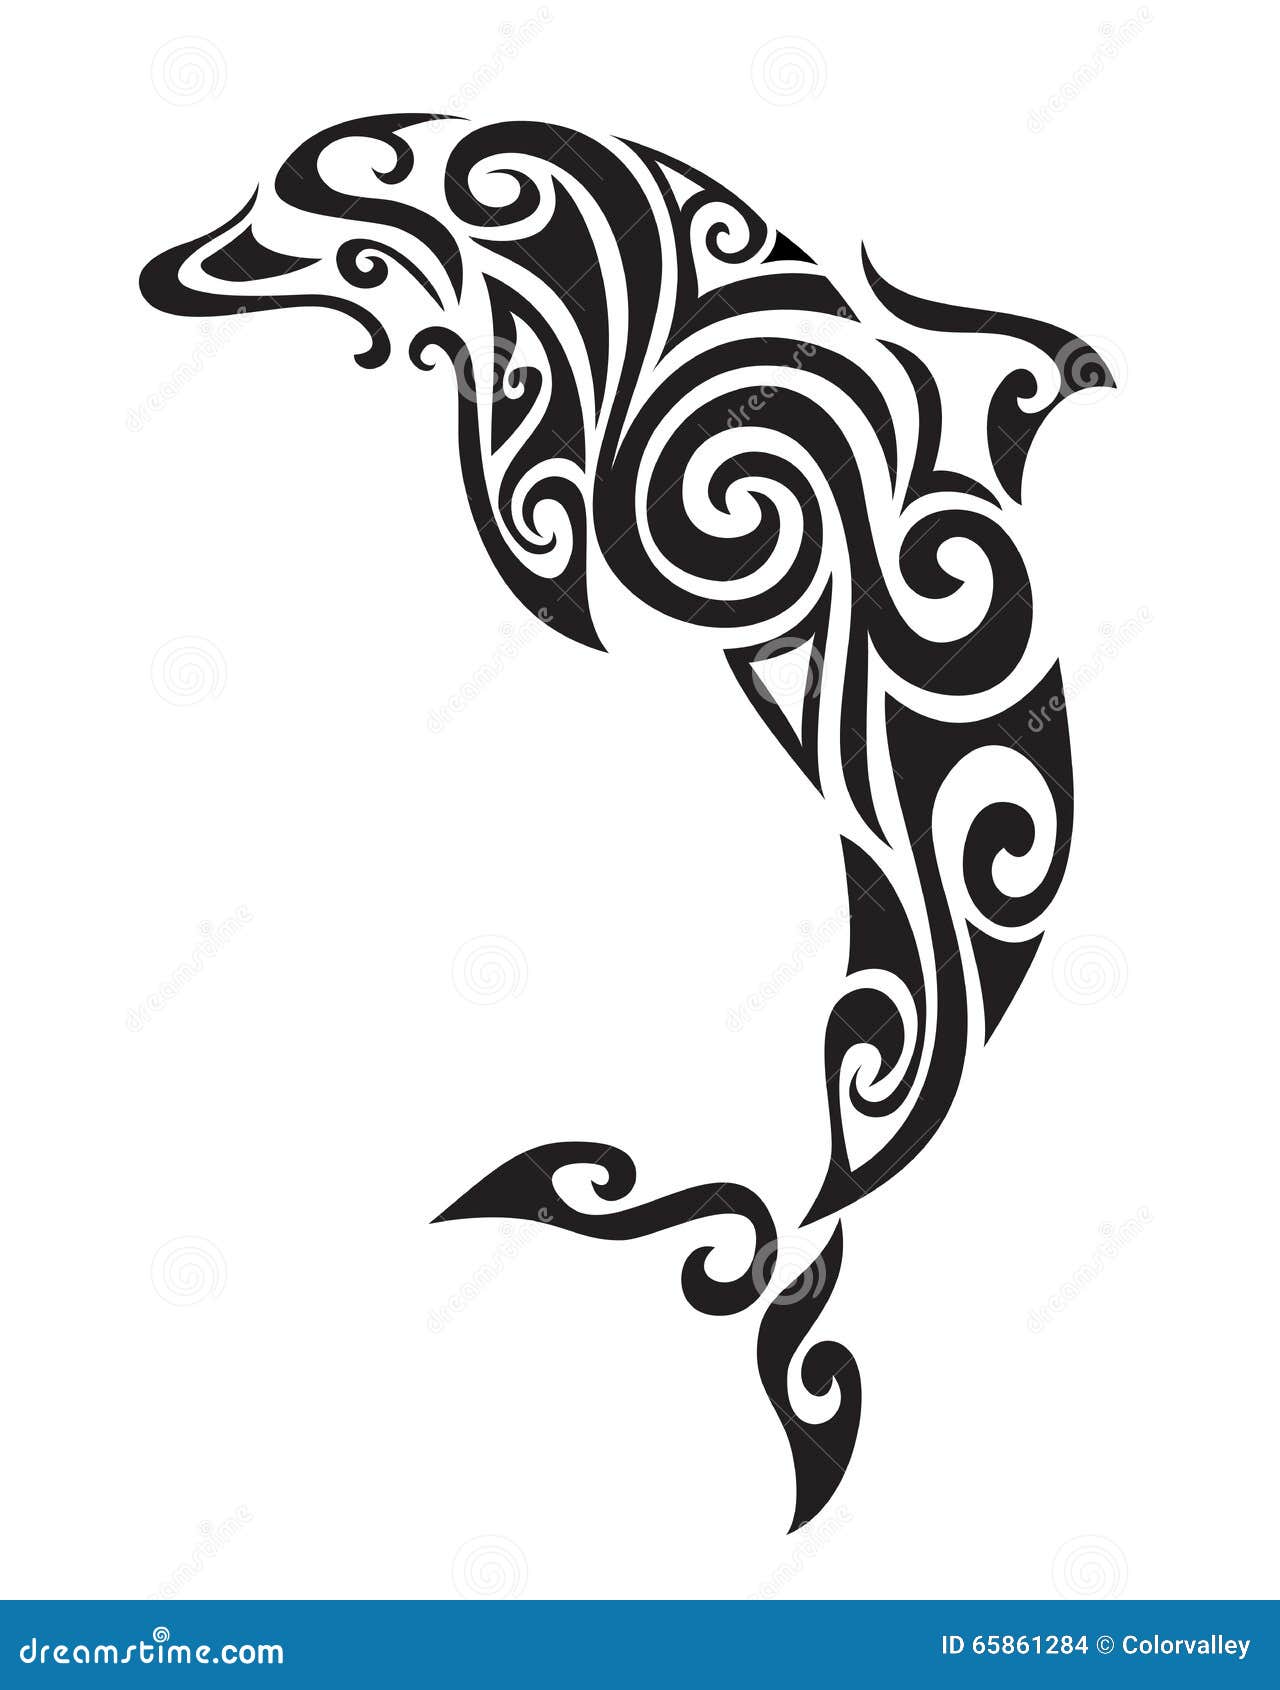 Dolphin Tattoo Design Images (Dolphin Ink Design Ideas) | Dolphins tattoo,  Simplistic tattoos, Tattoo designs